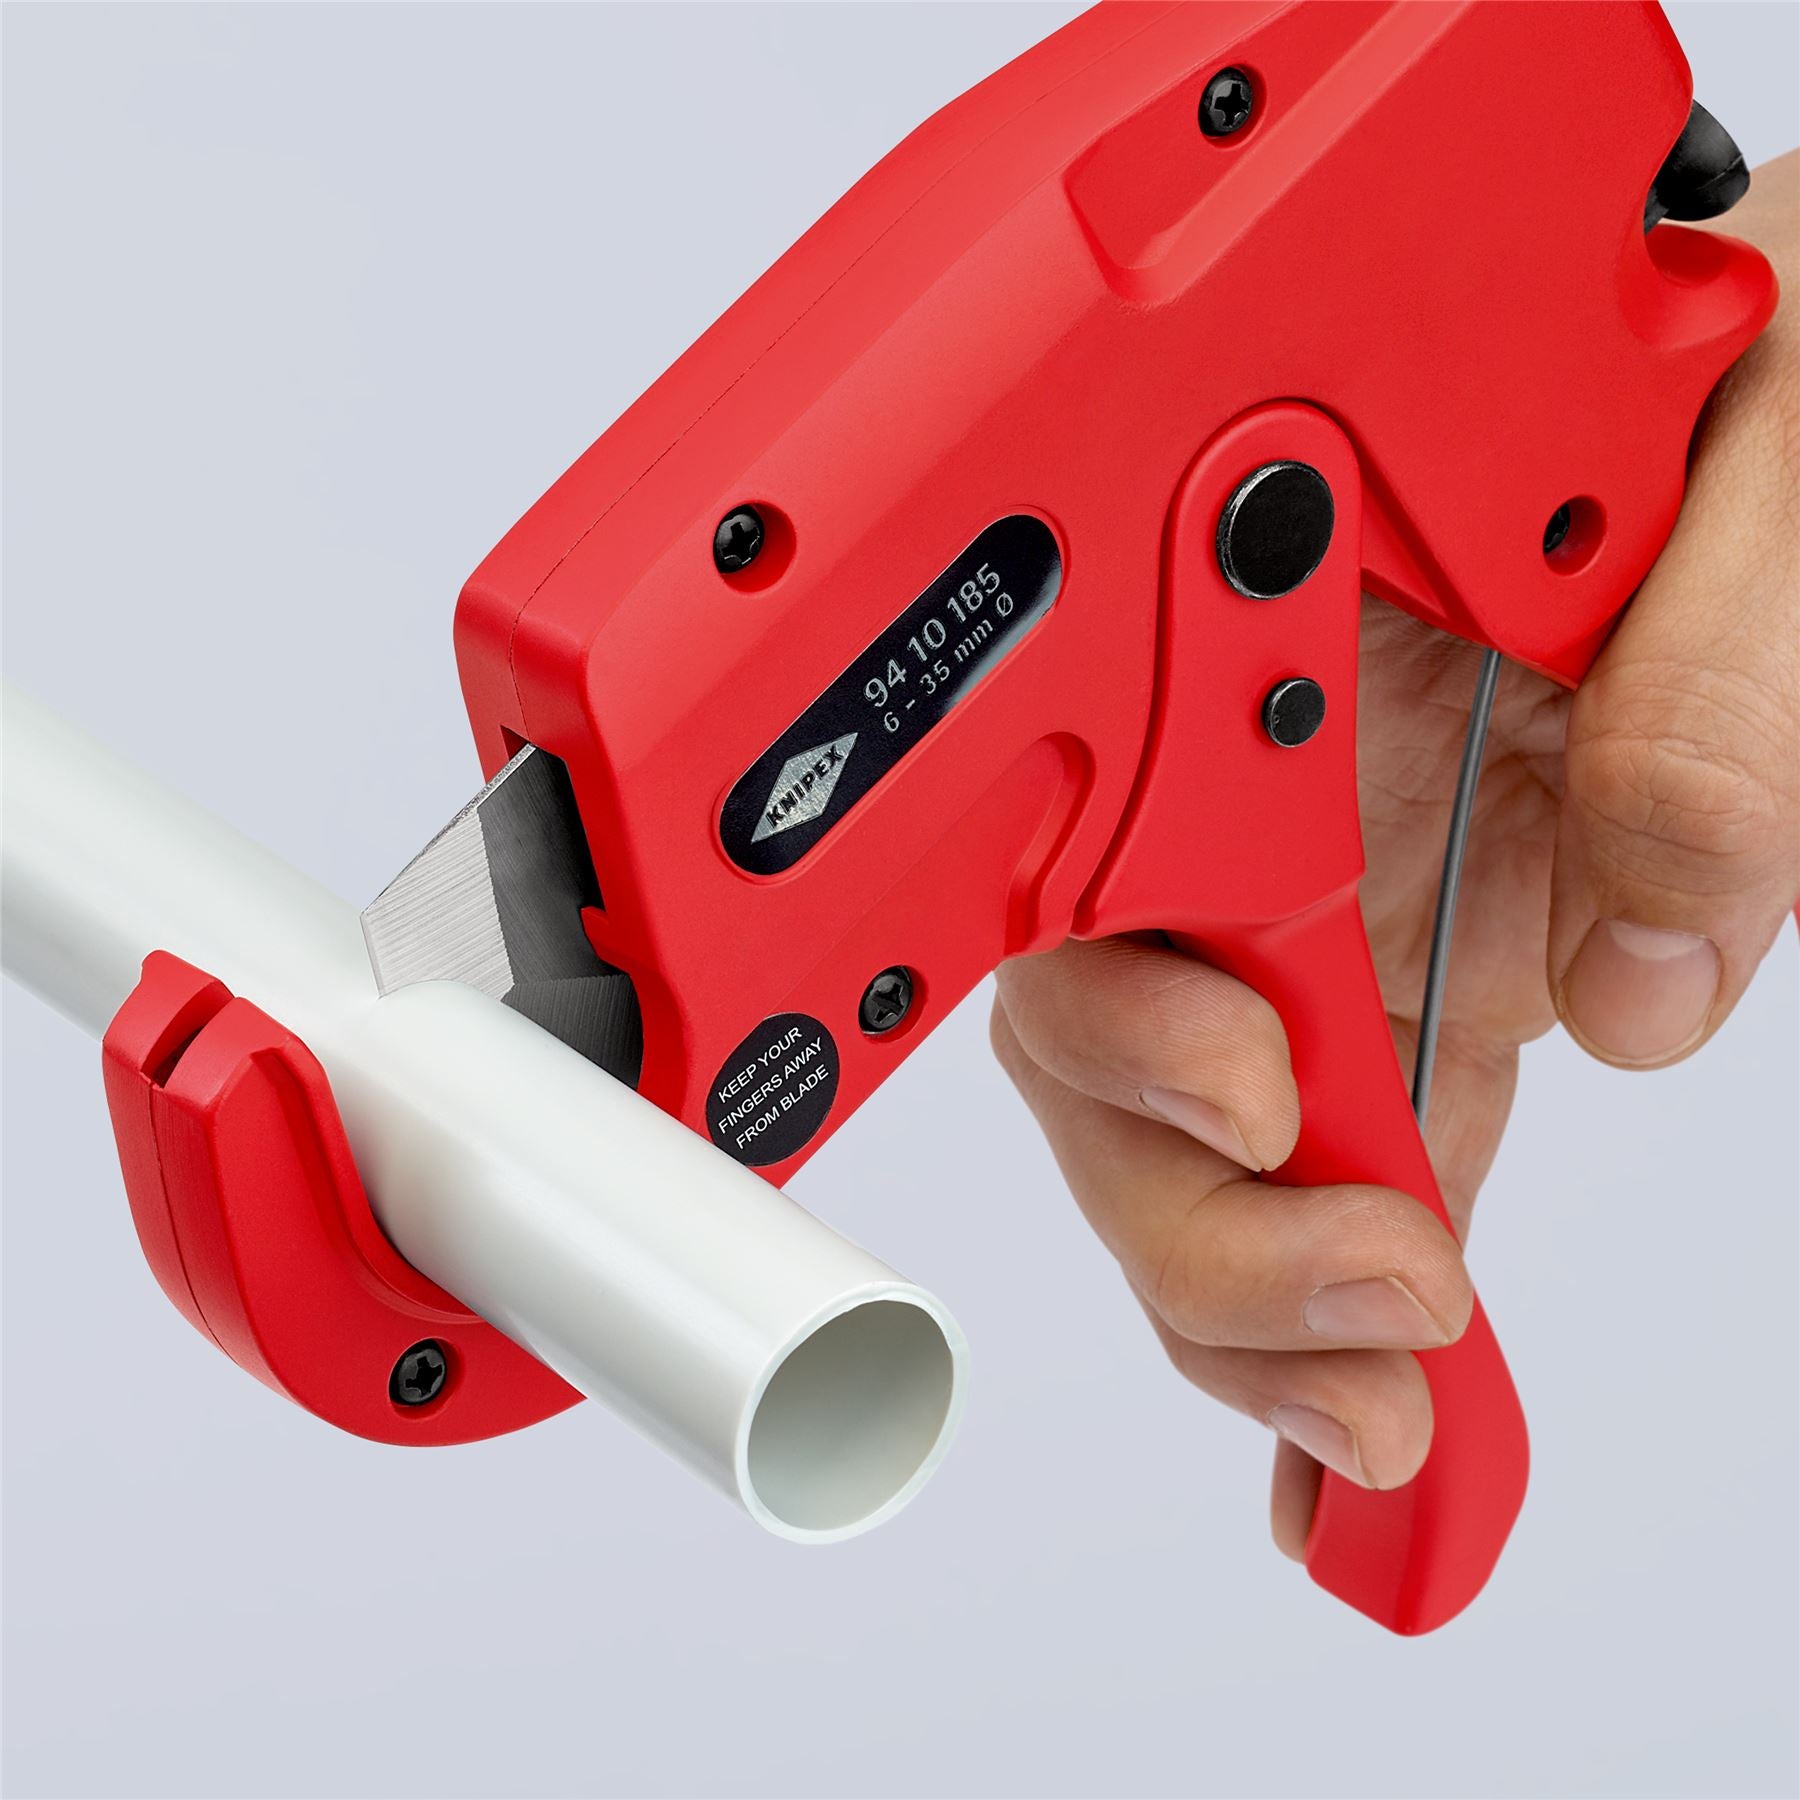 KNIPEX Pipe Cutter for Plastic Conduit Pipes Electrical Installation Work 185mm 6-35mm Capacity 94 10 185